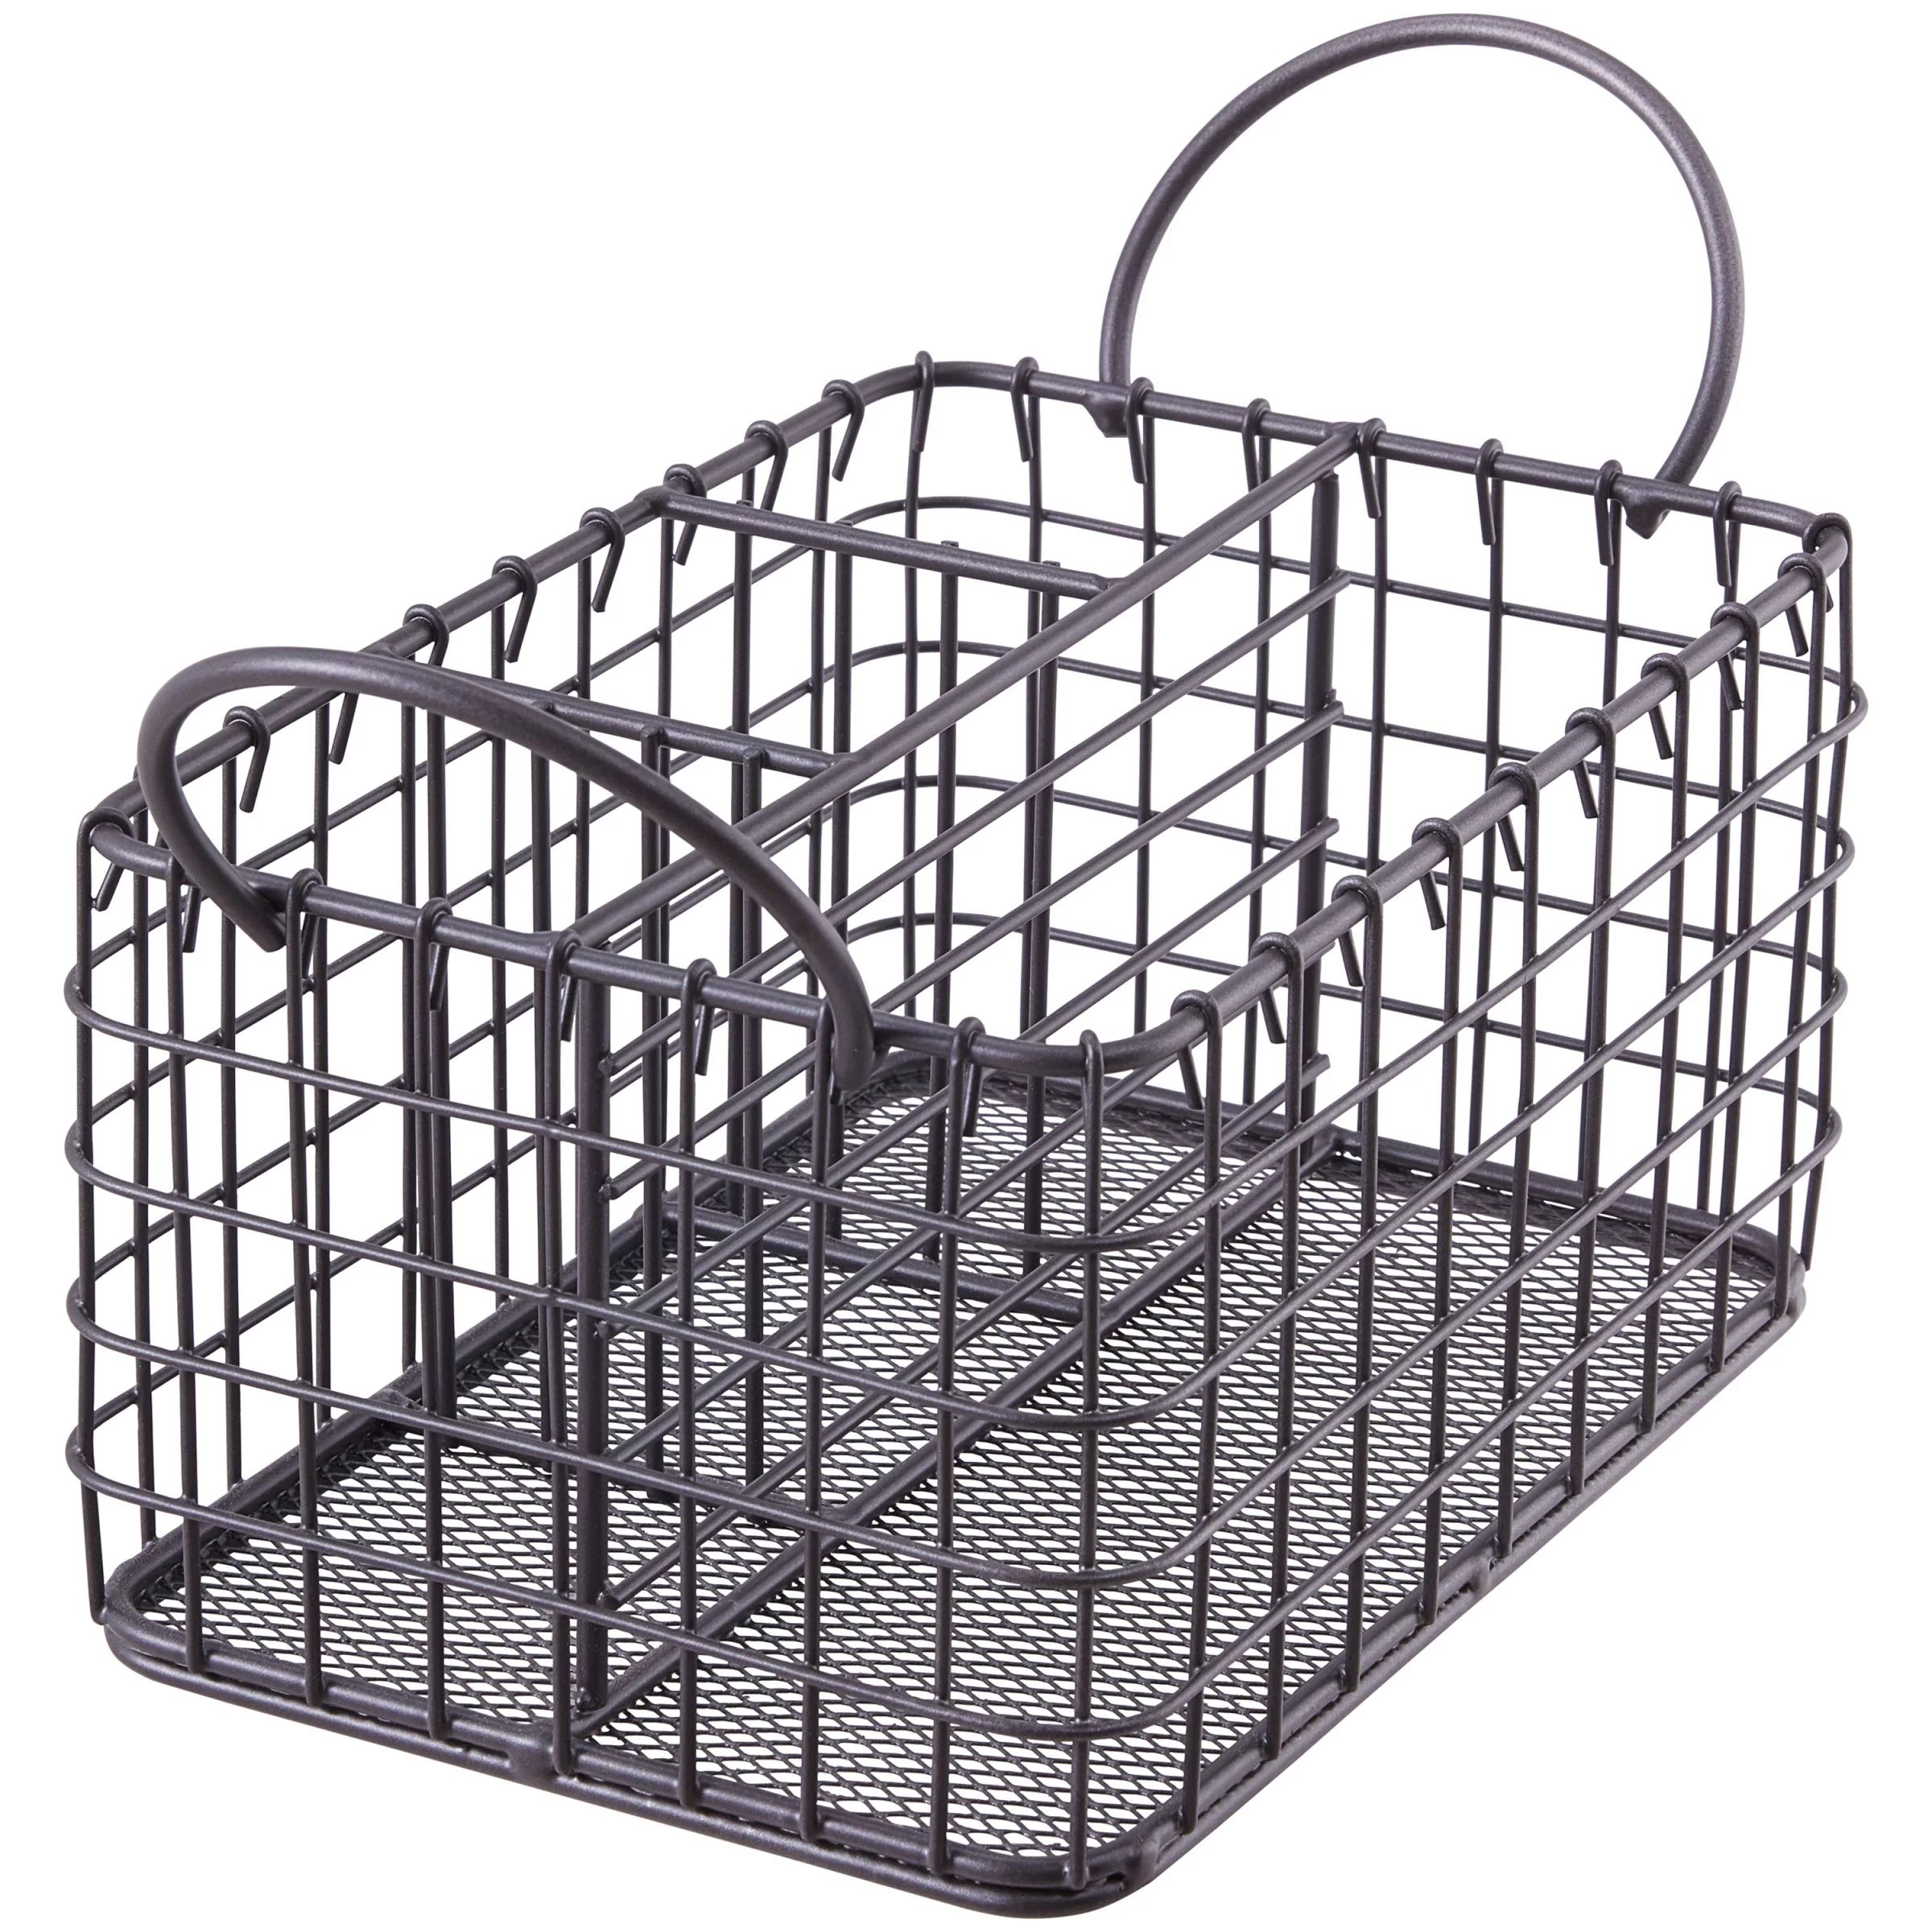 Better Homes & Gardens Antiqued Grey Wire Caddy with Handles | Walmart (US)